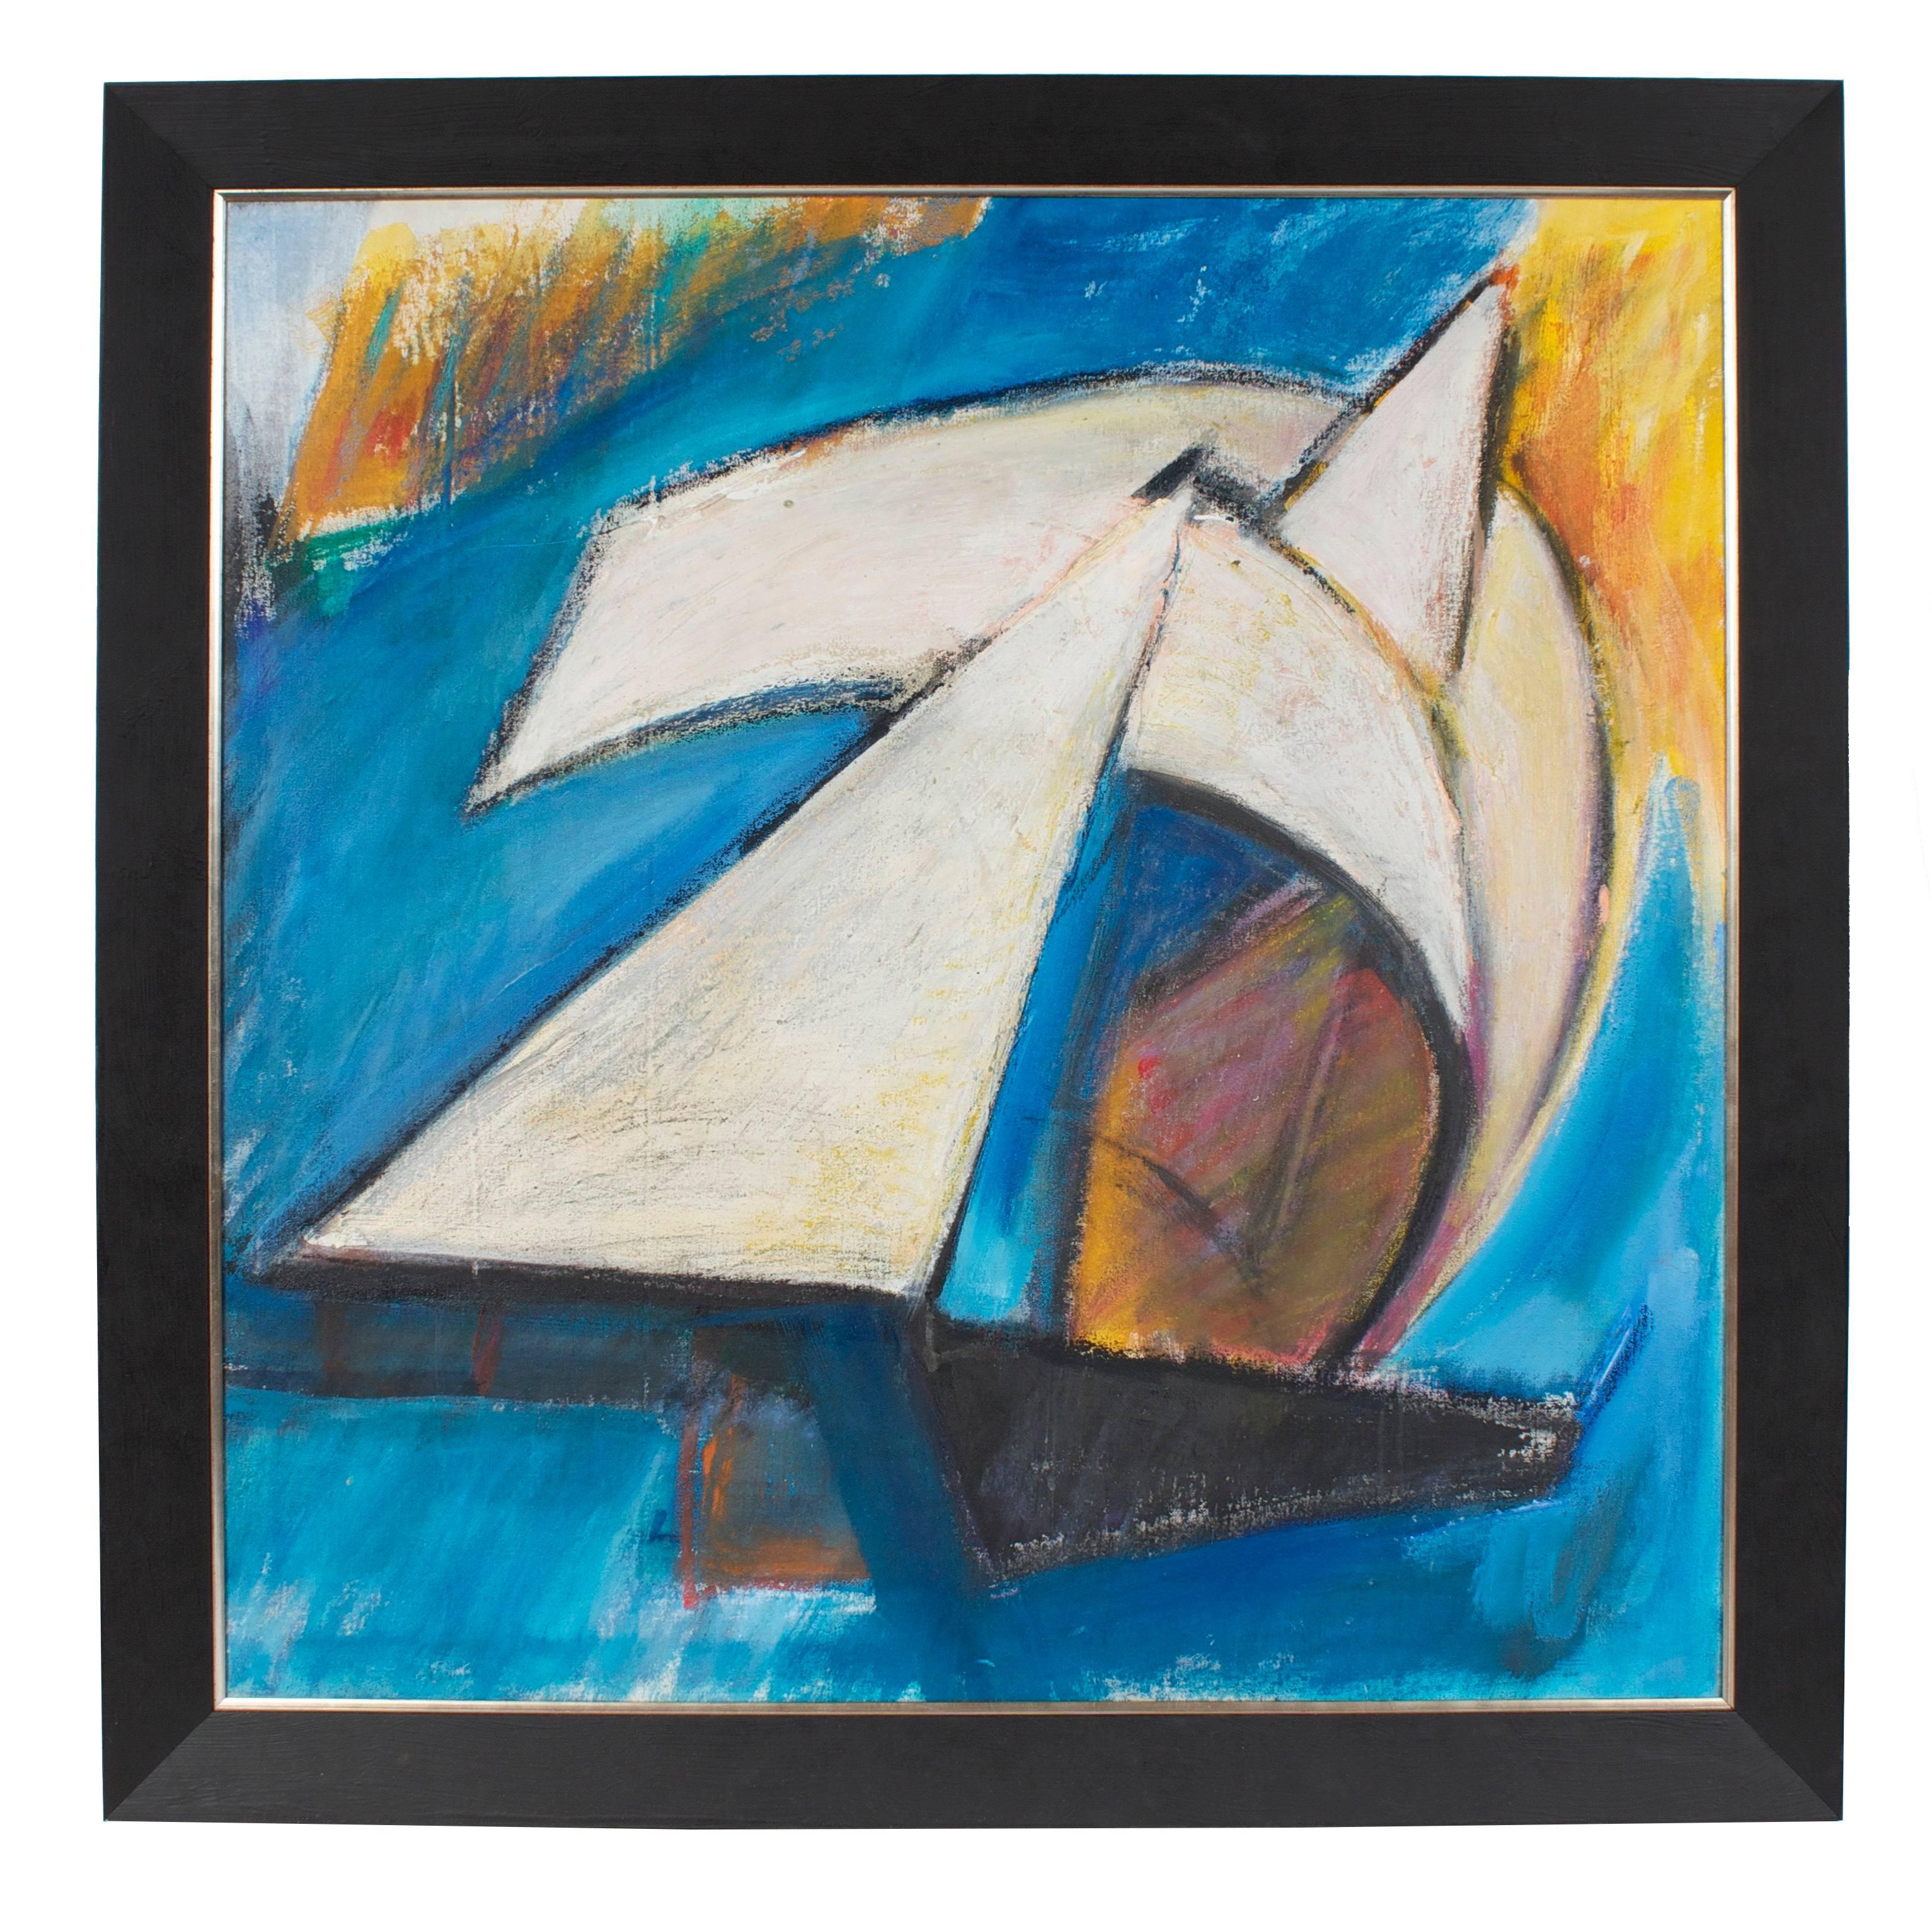 Barbara Lewis Abstract Painting - "White Sails" Modernist Abstract with Blue, Circa 1960s